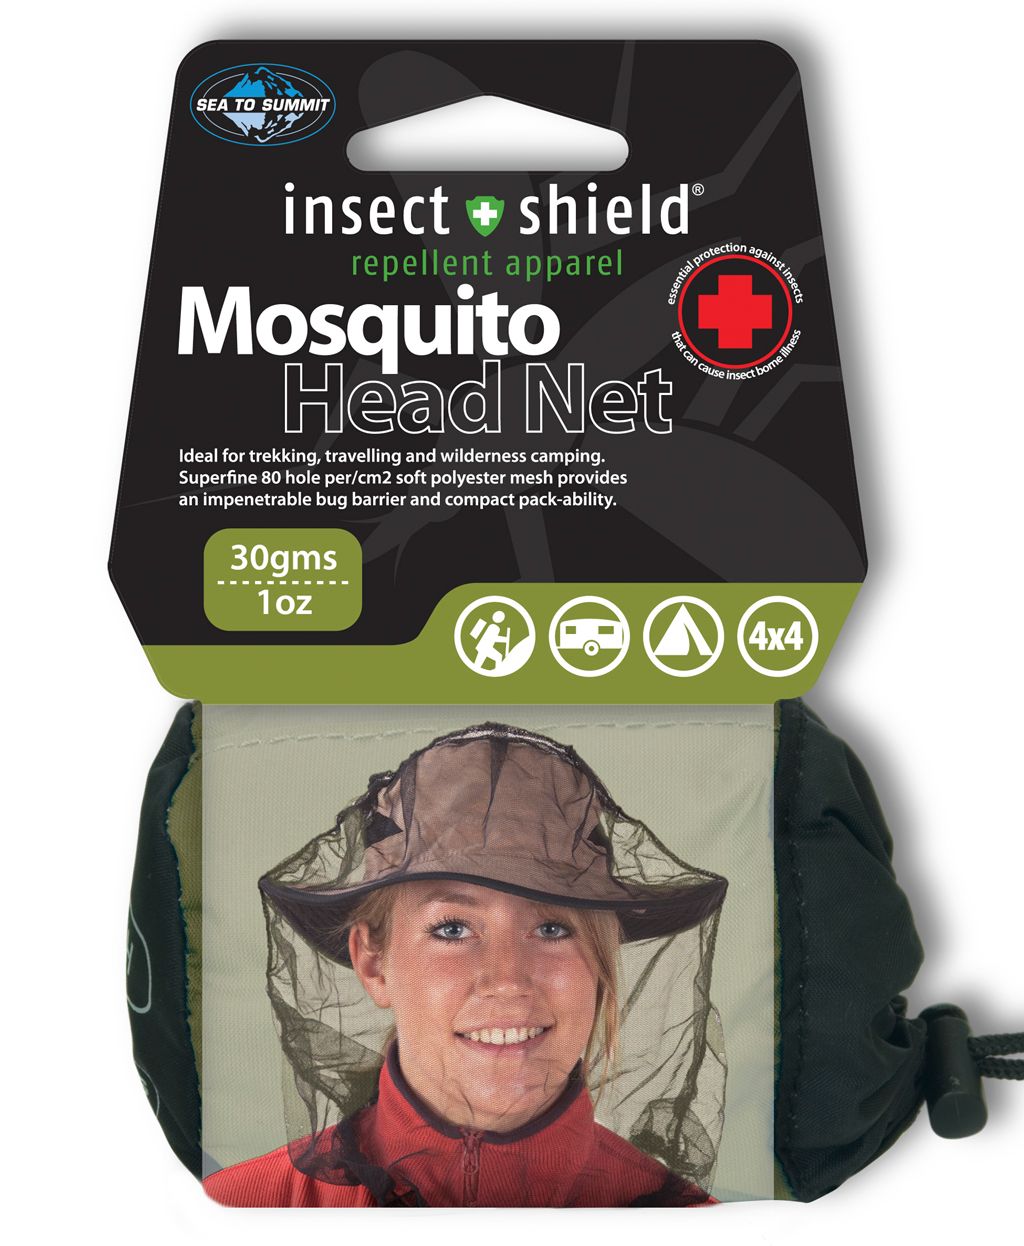 Mosquito Head Net Insect